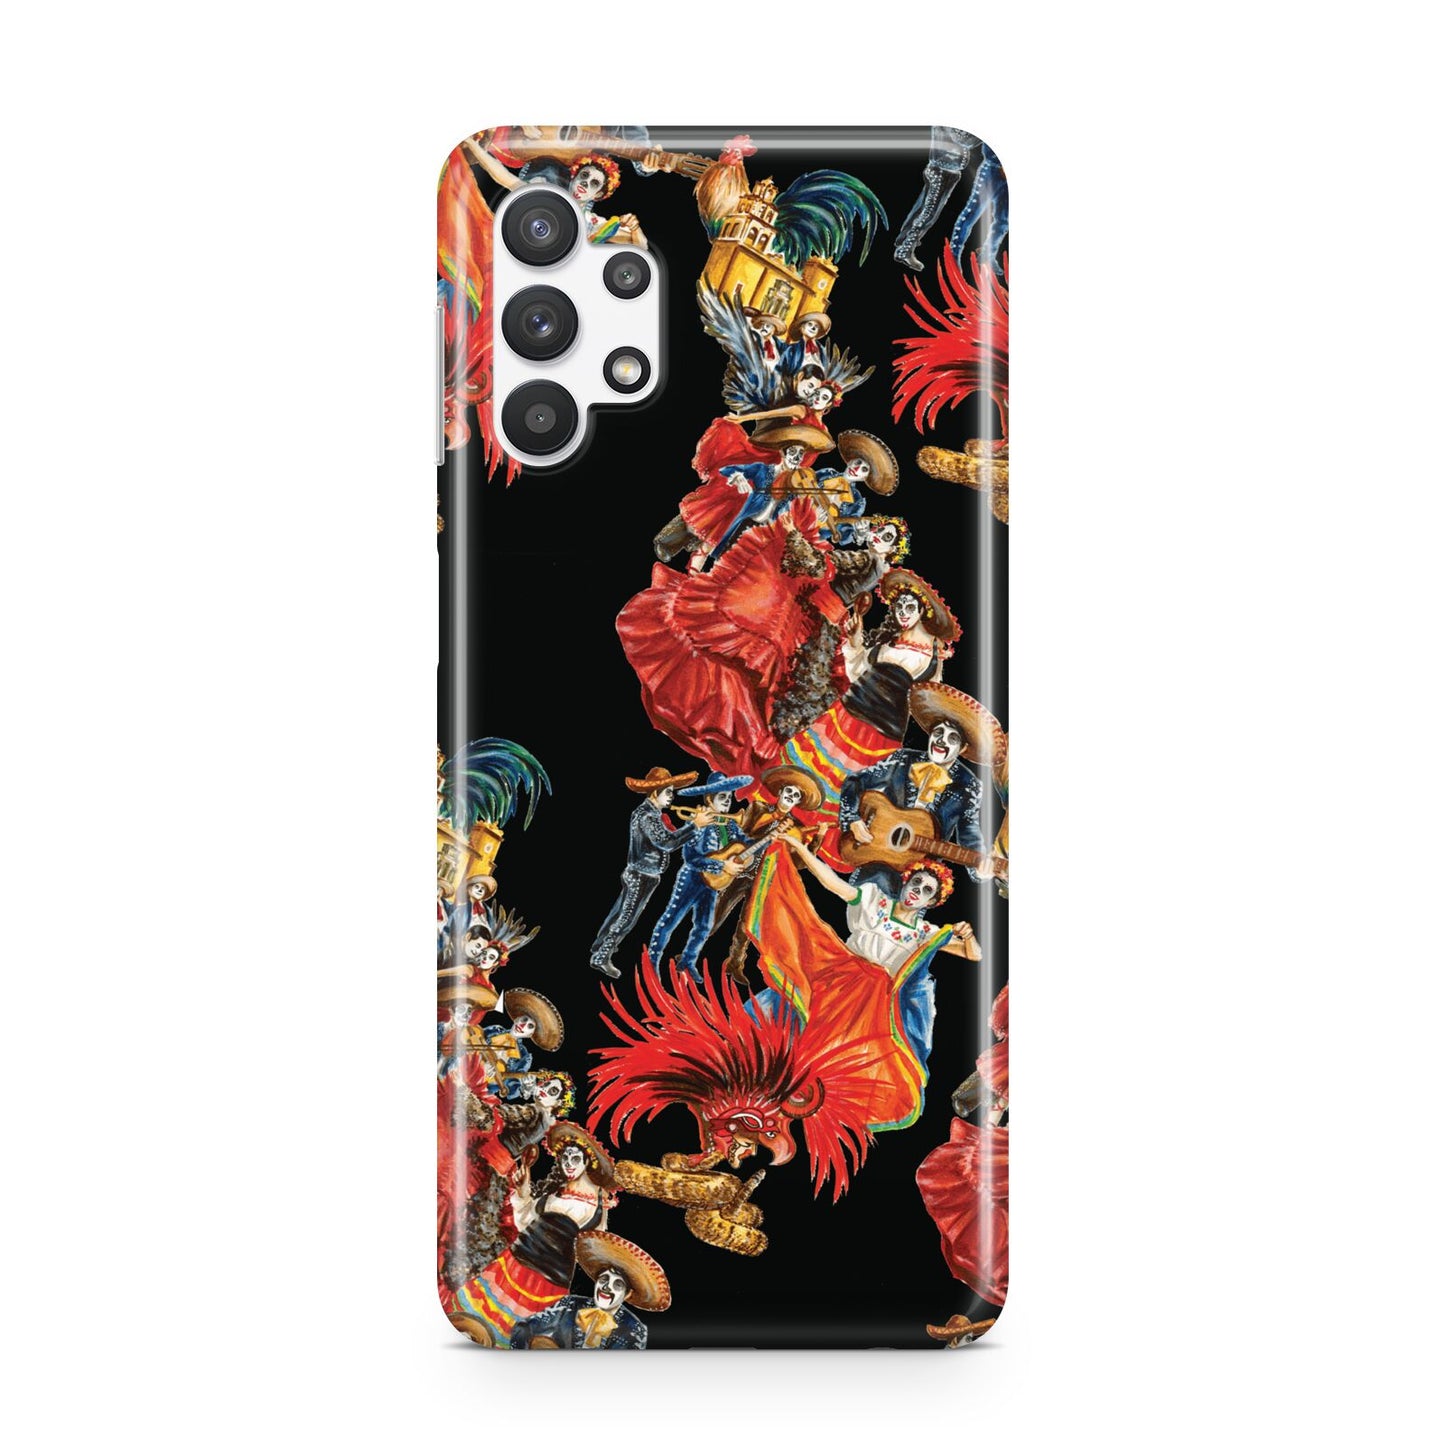 Day of the Dead Festival Samsung A32 5G Case